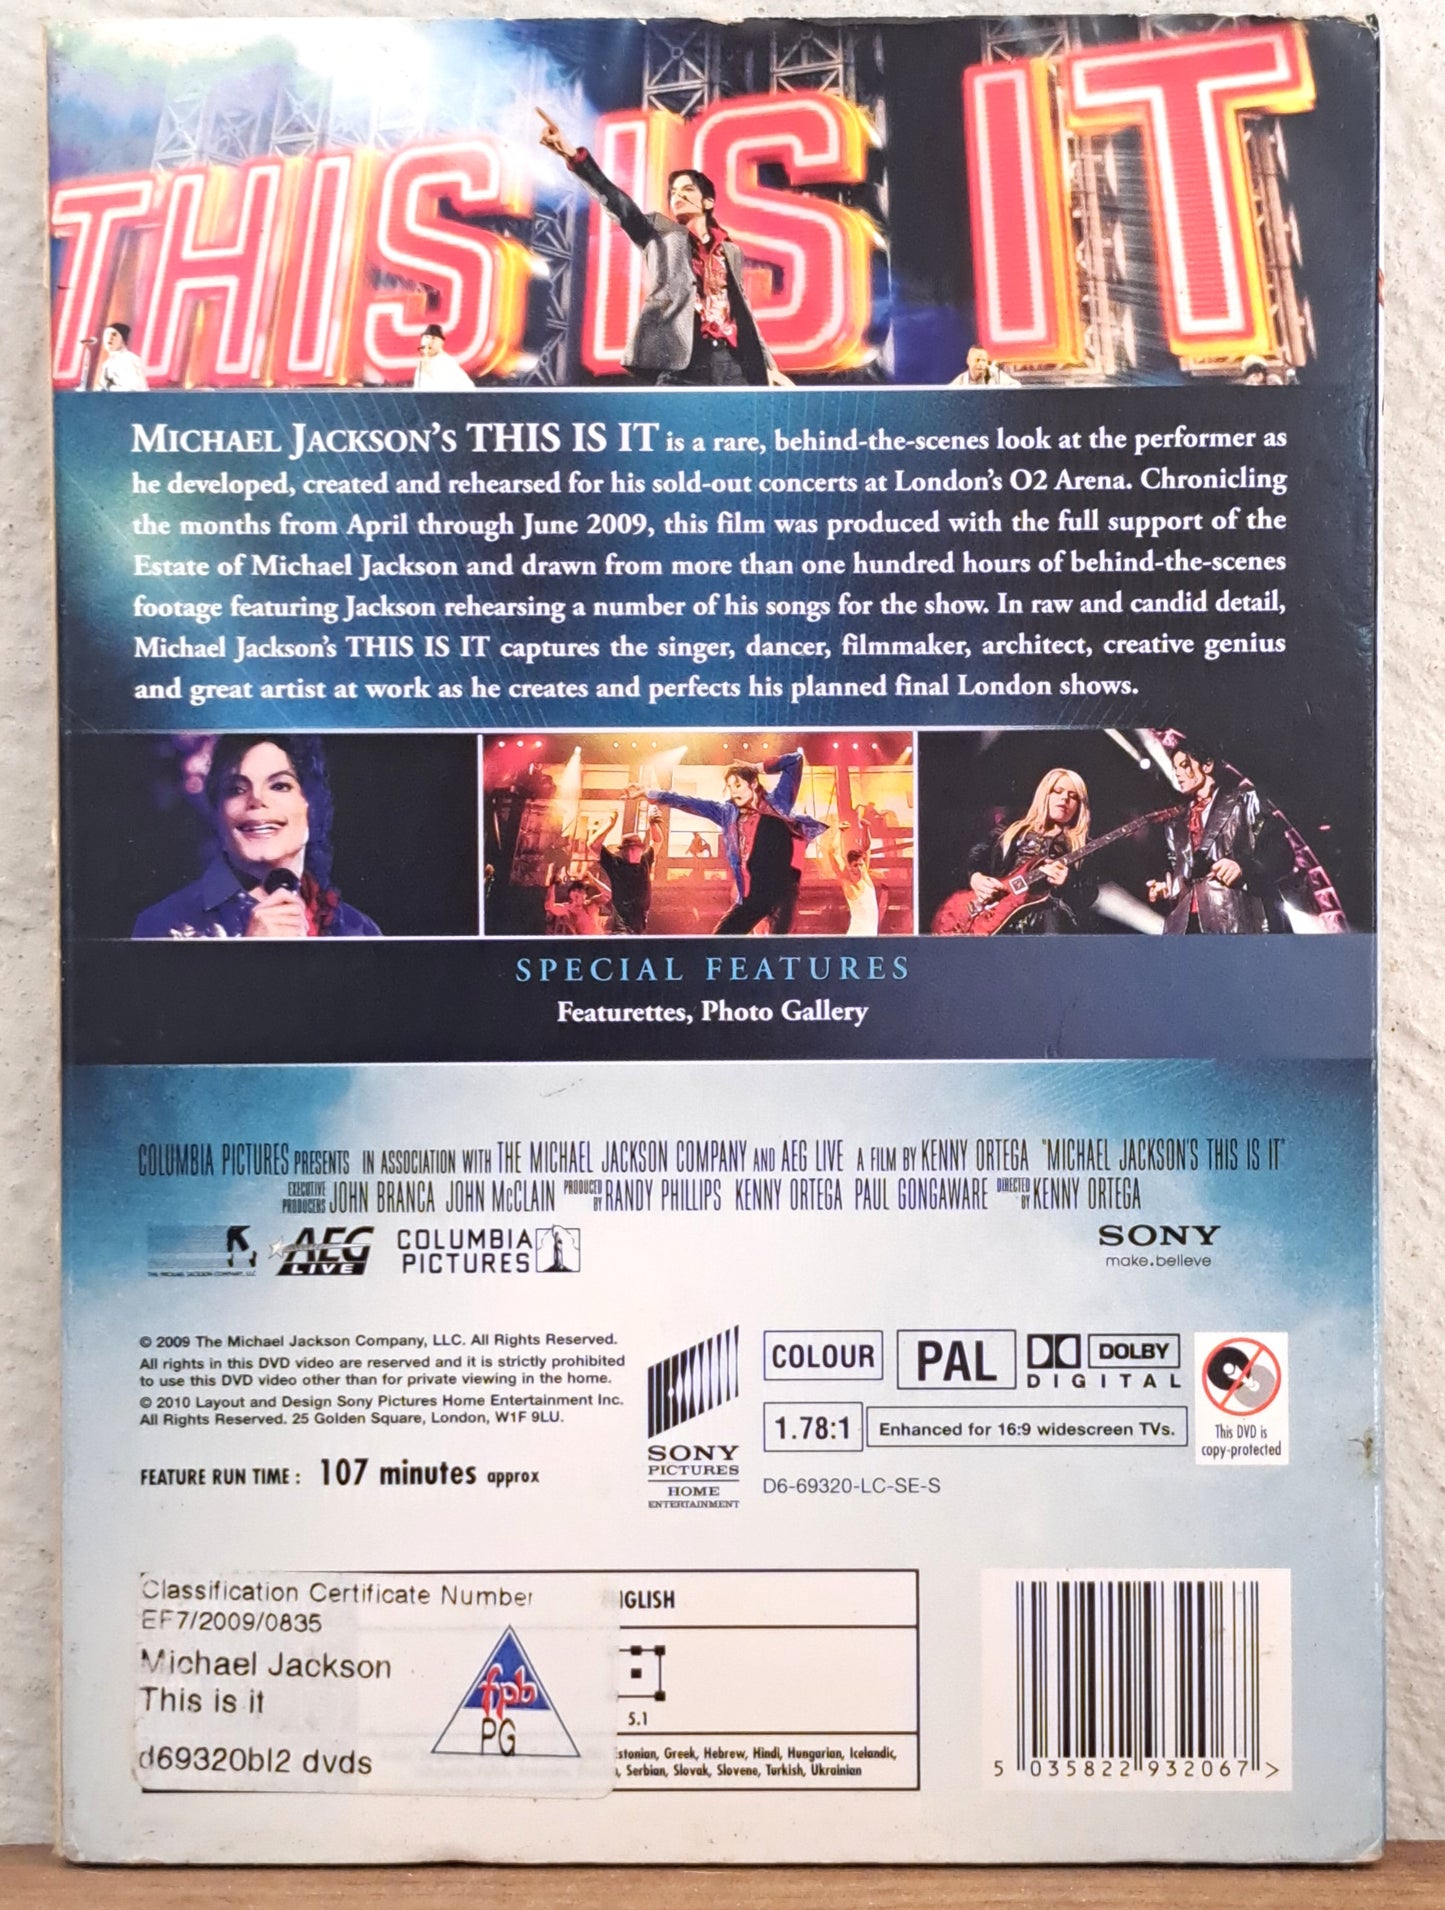 Michael Jackson's - This is it (dvd)